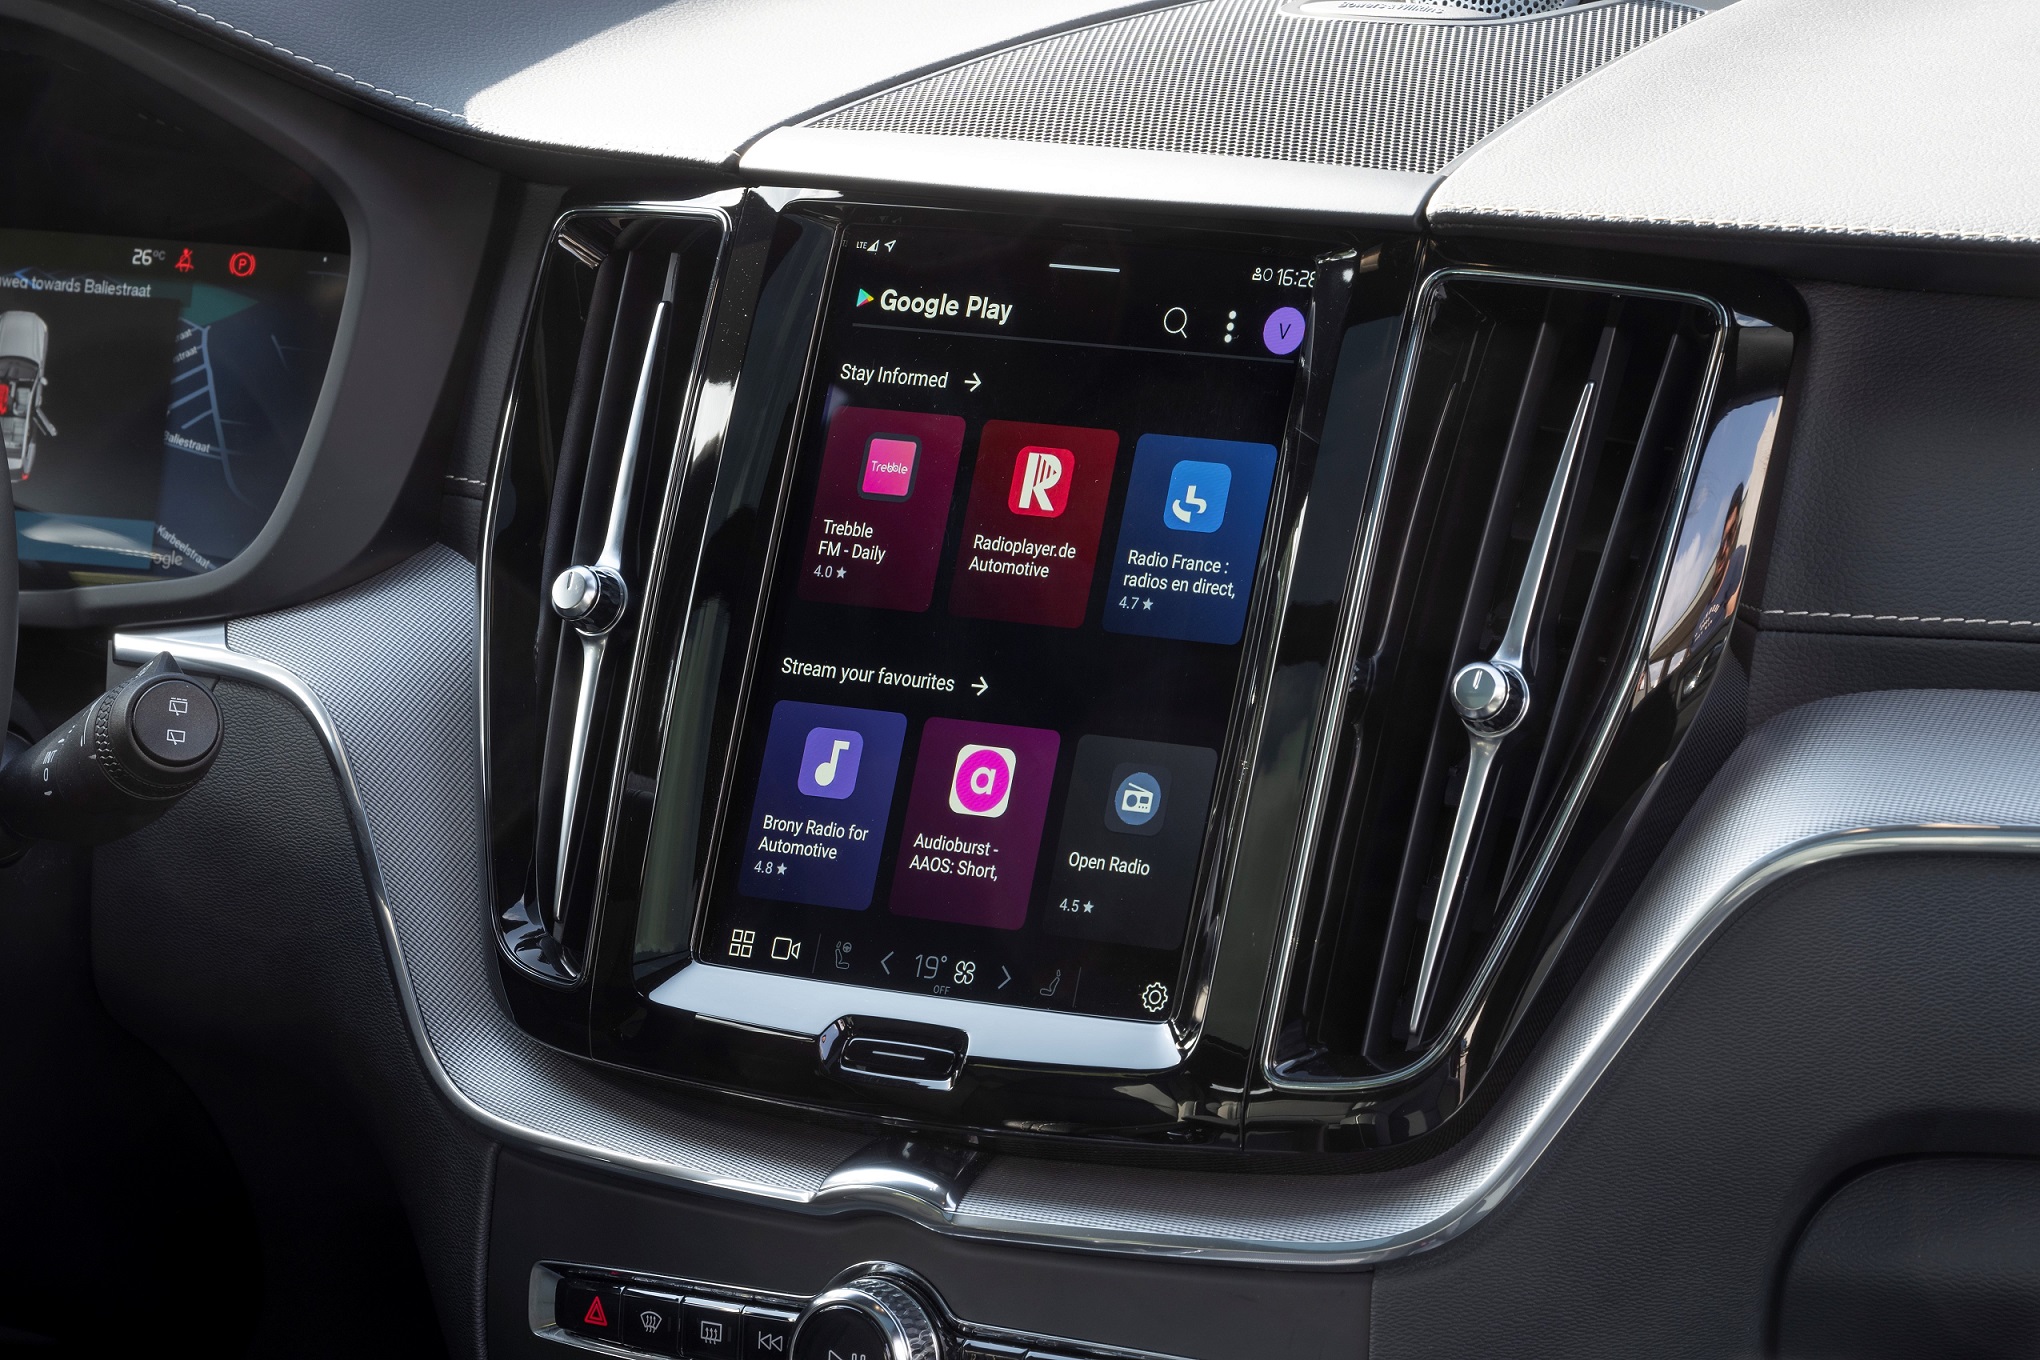 The 9-inch touchscreen in the Volvo instrument panel